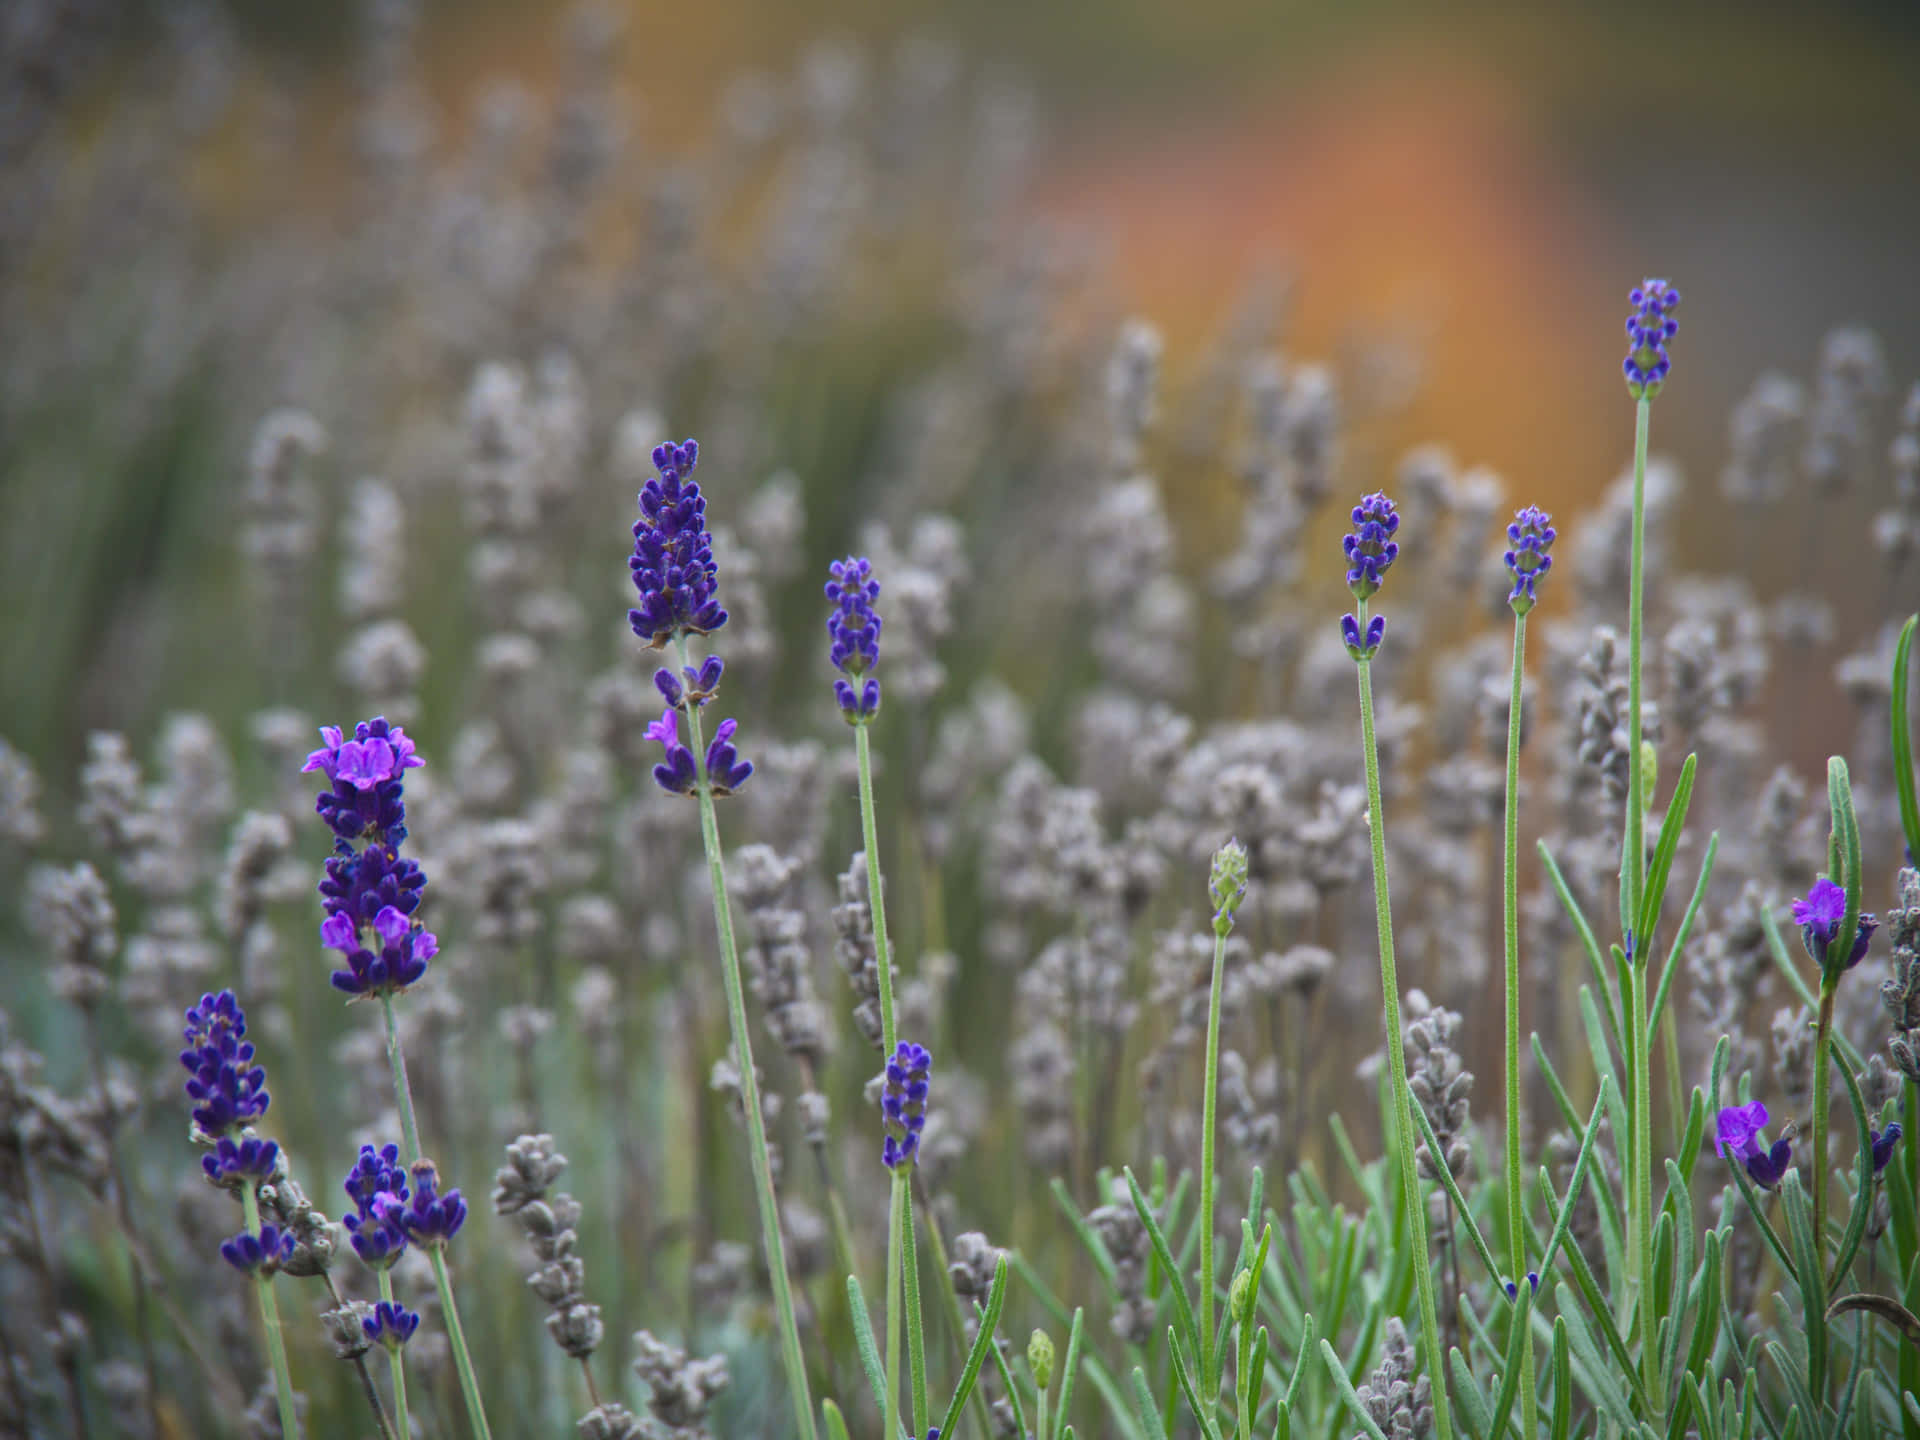 A magical sea of sweet-smelling lavender stretches to the horizon